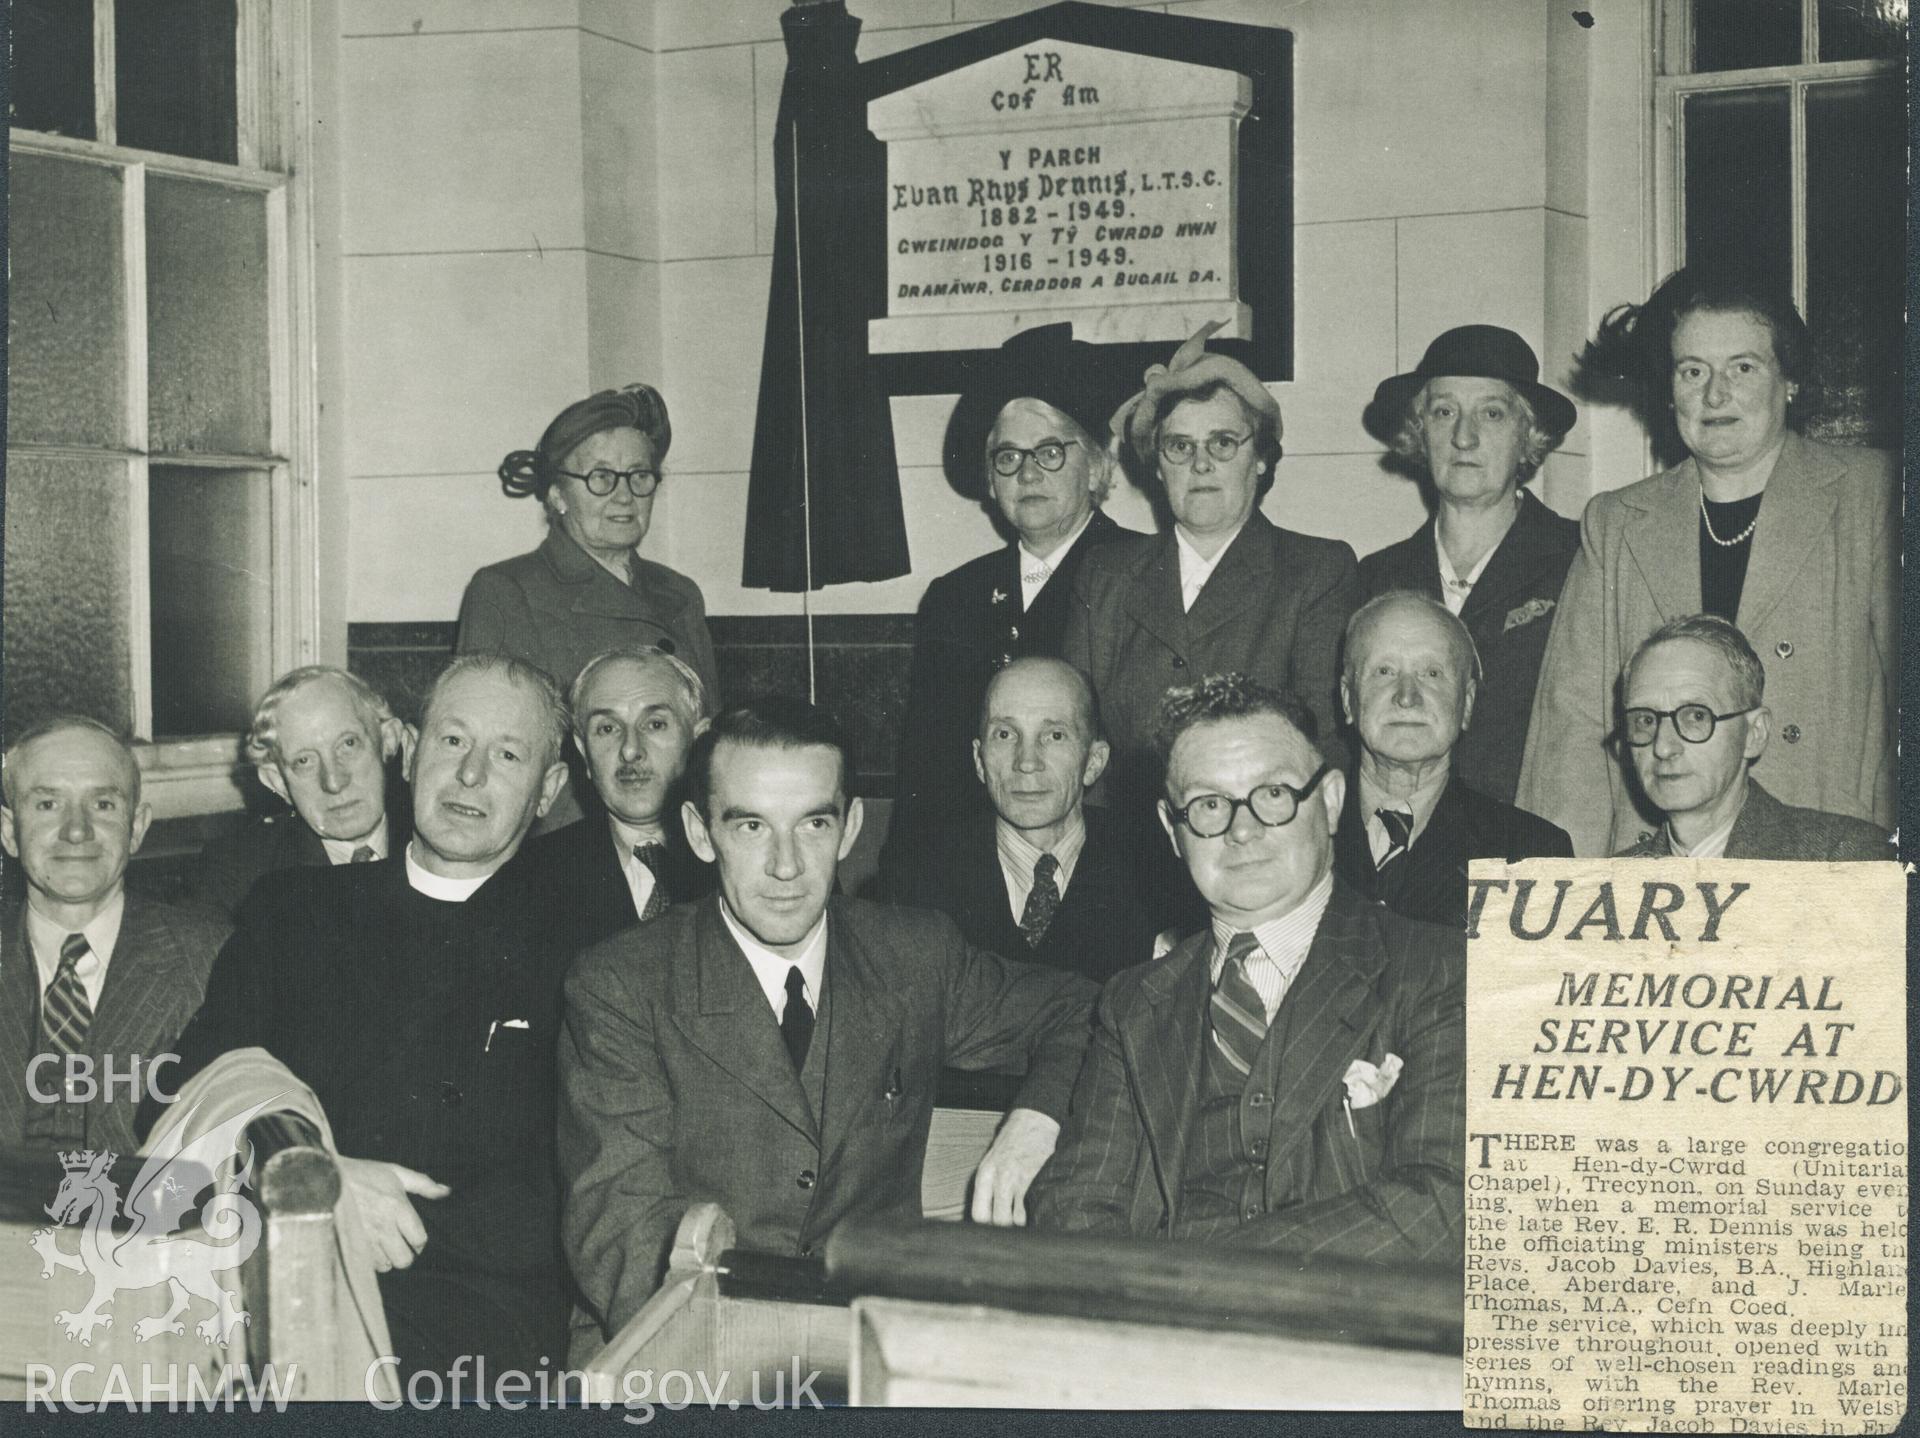 Black and white photograph of memorial service dedicated to the Rev. Evan Rhys Dennis, who was minister at Hen Dy Cwrdd 1916-1949. Donated by the Rev. Eric Jones to the RCAHMW as part of the Digital Dissent Project.